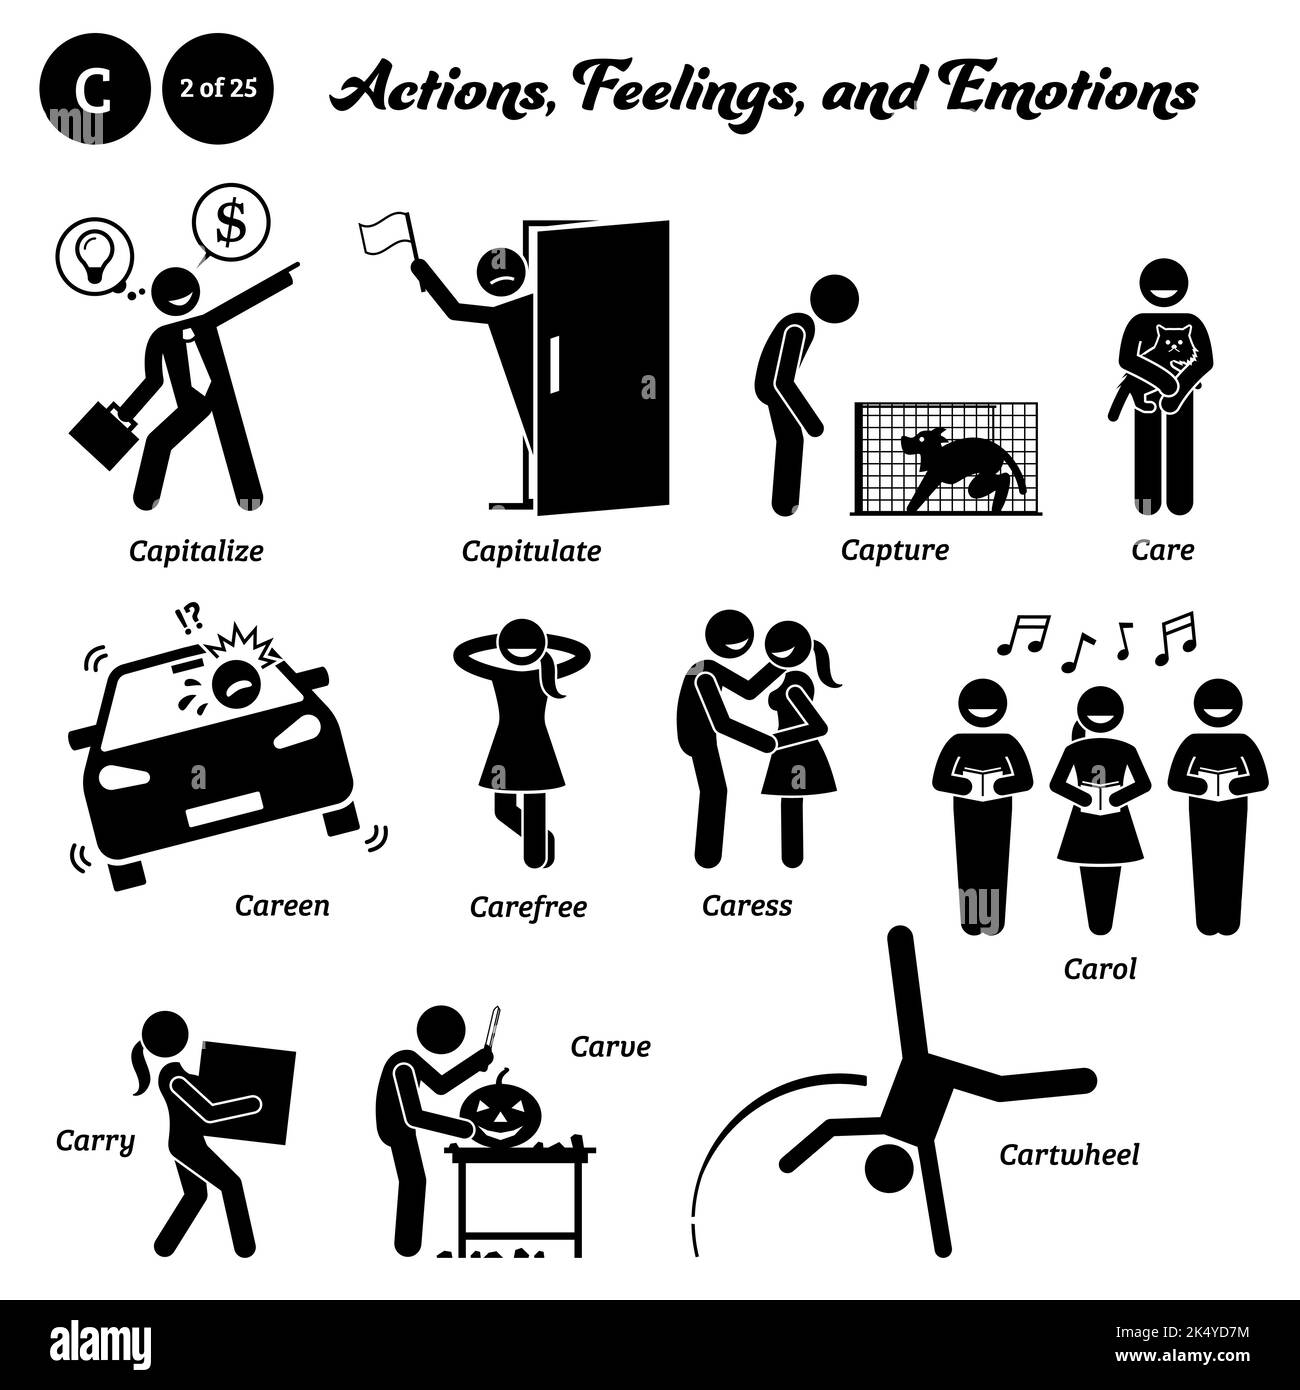 Stick figure human people man action, feelings, and emotions icons starting with alphabet C. Capitalize, capitulate, capture, care, careen, carefree, Stock Vector